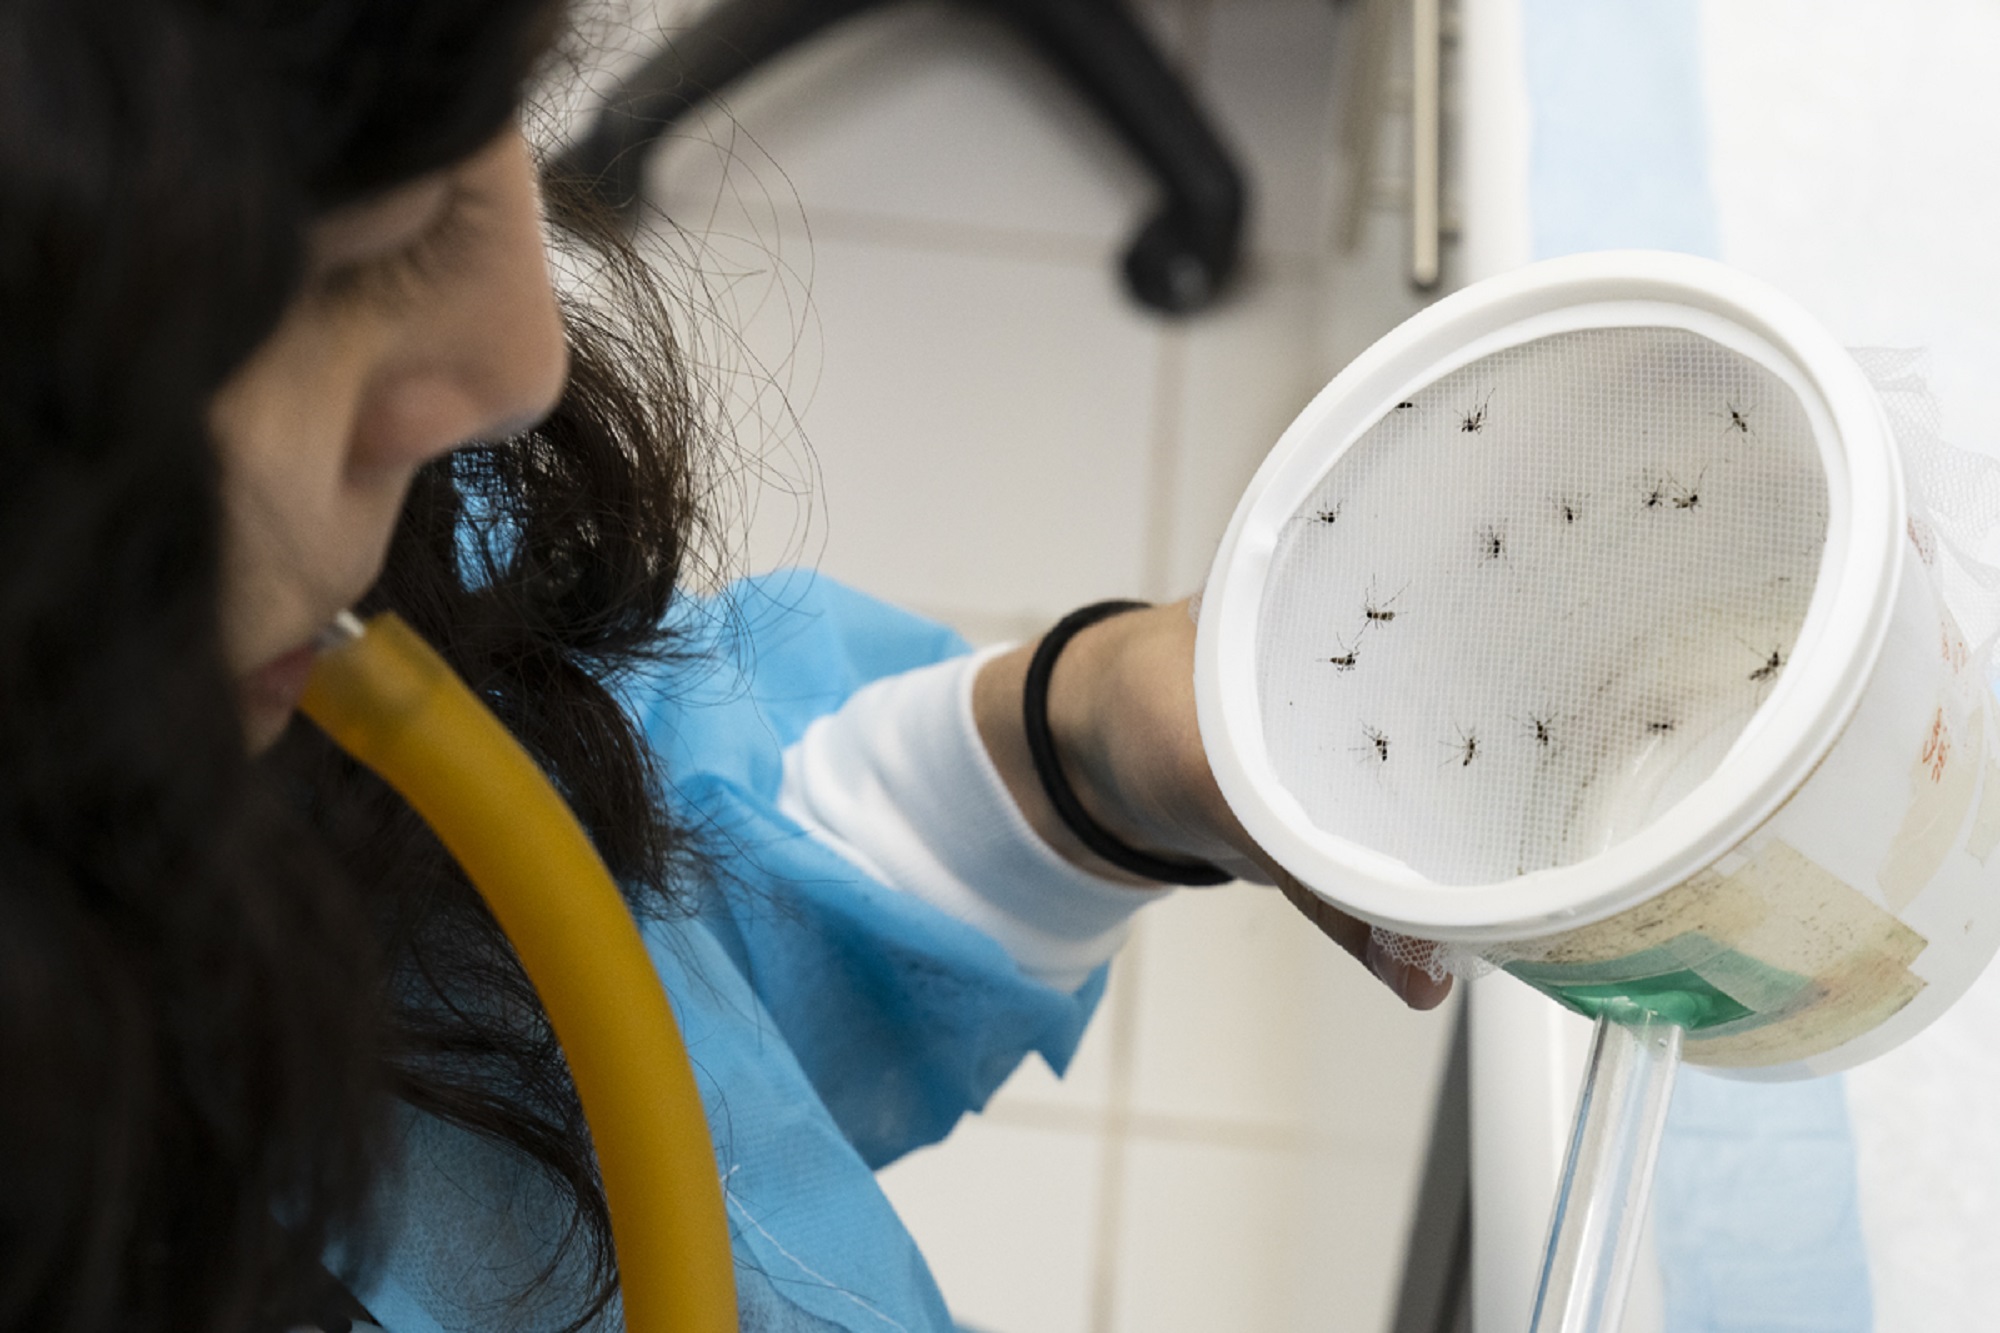 The first swarm of genetically modified mosquitoes is about to hit the US